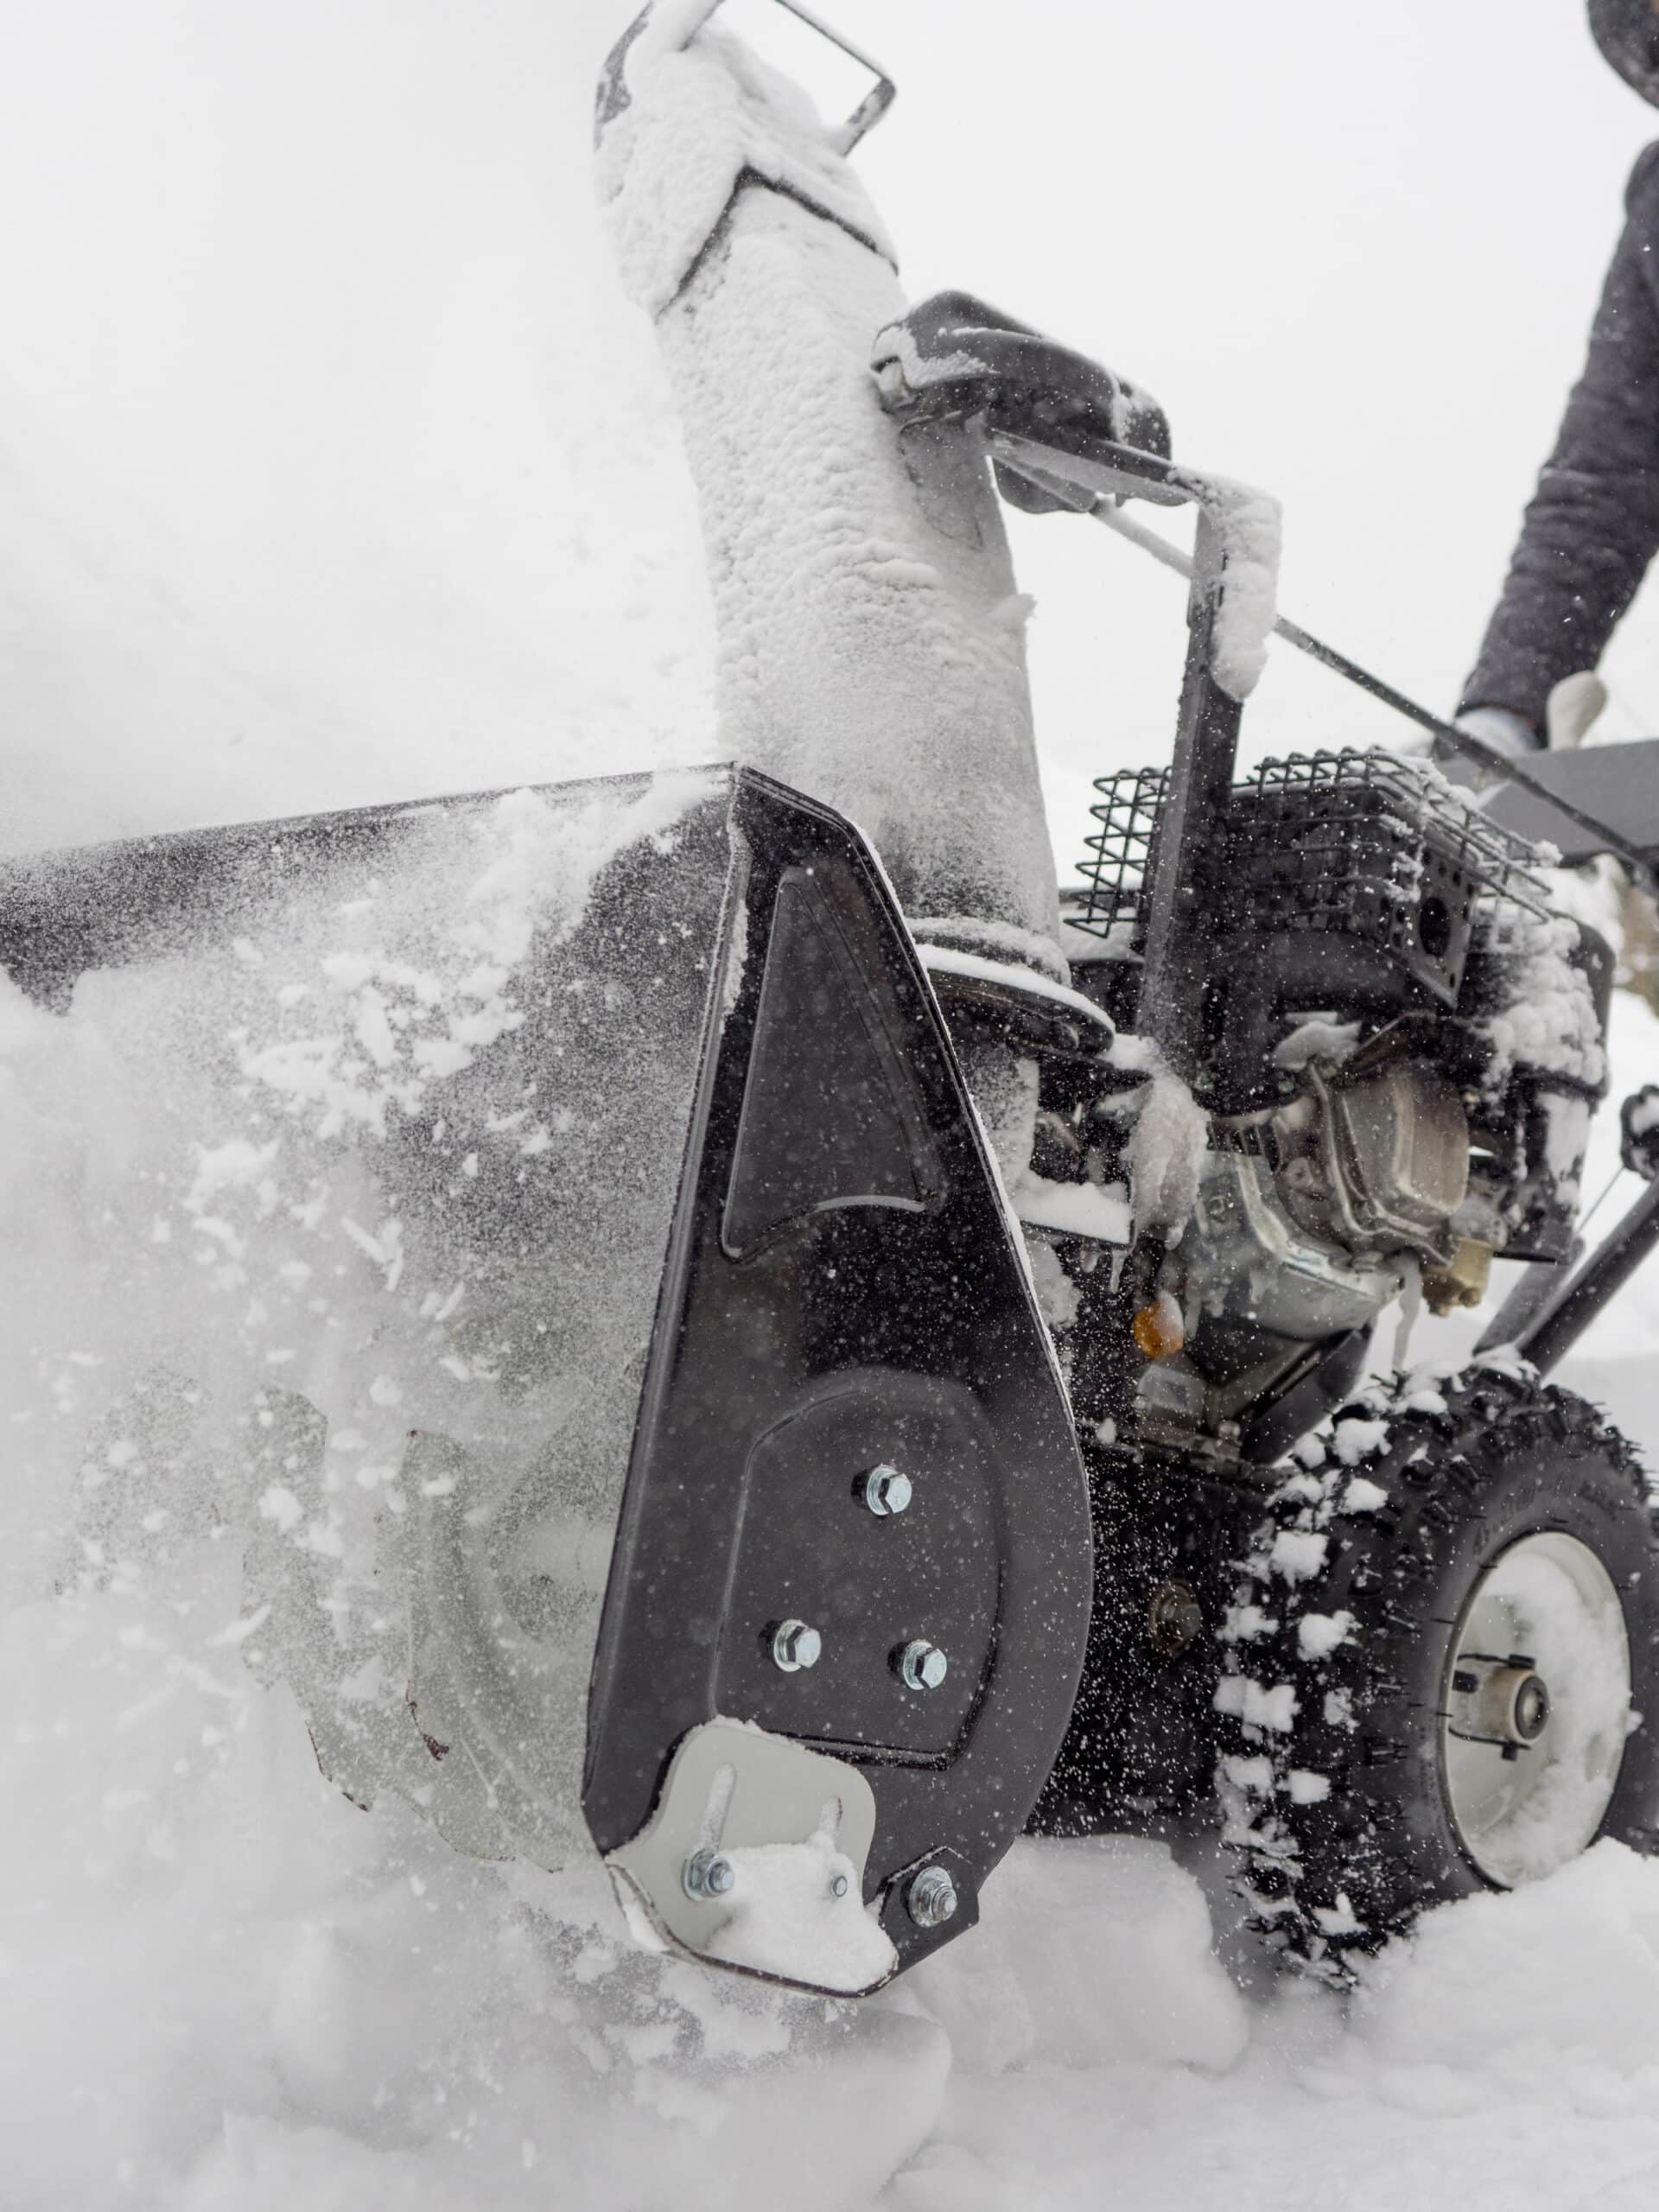 Clearing snow with a snowblower